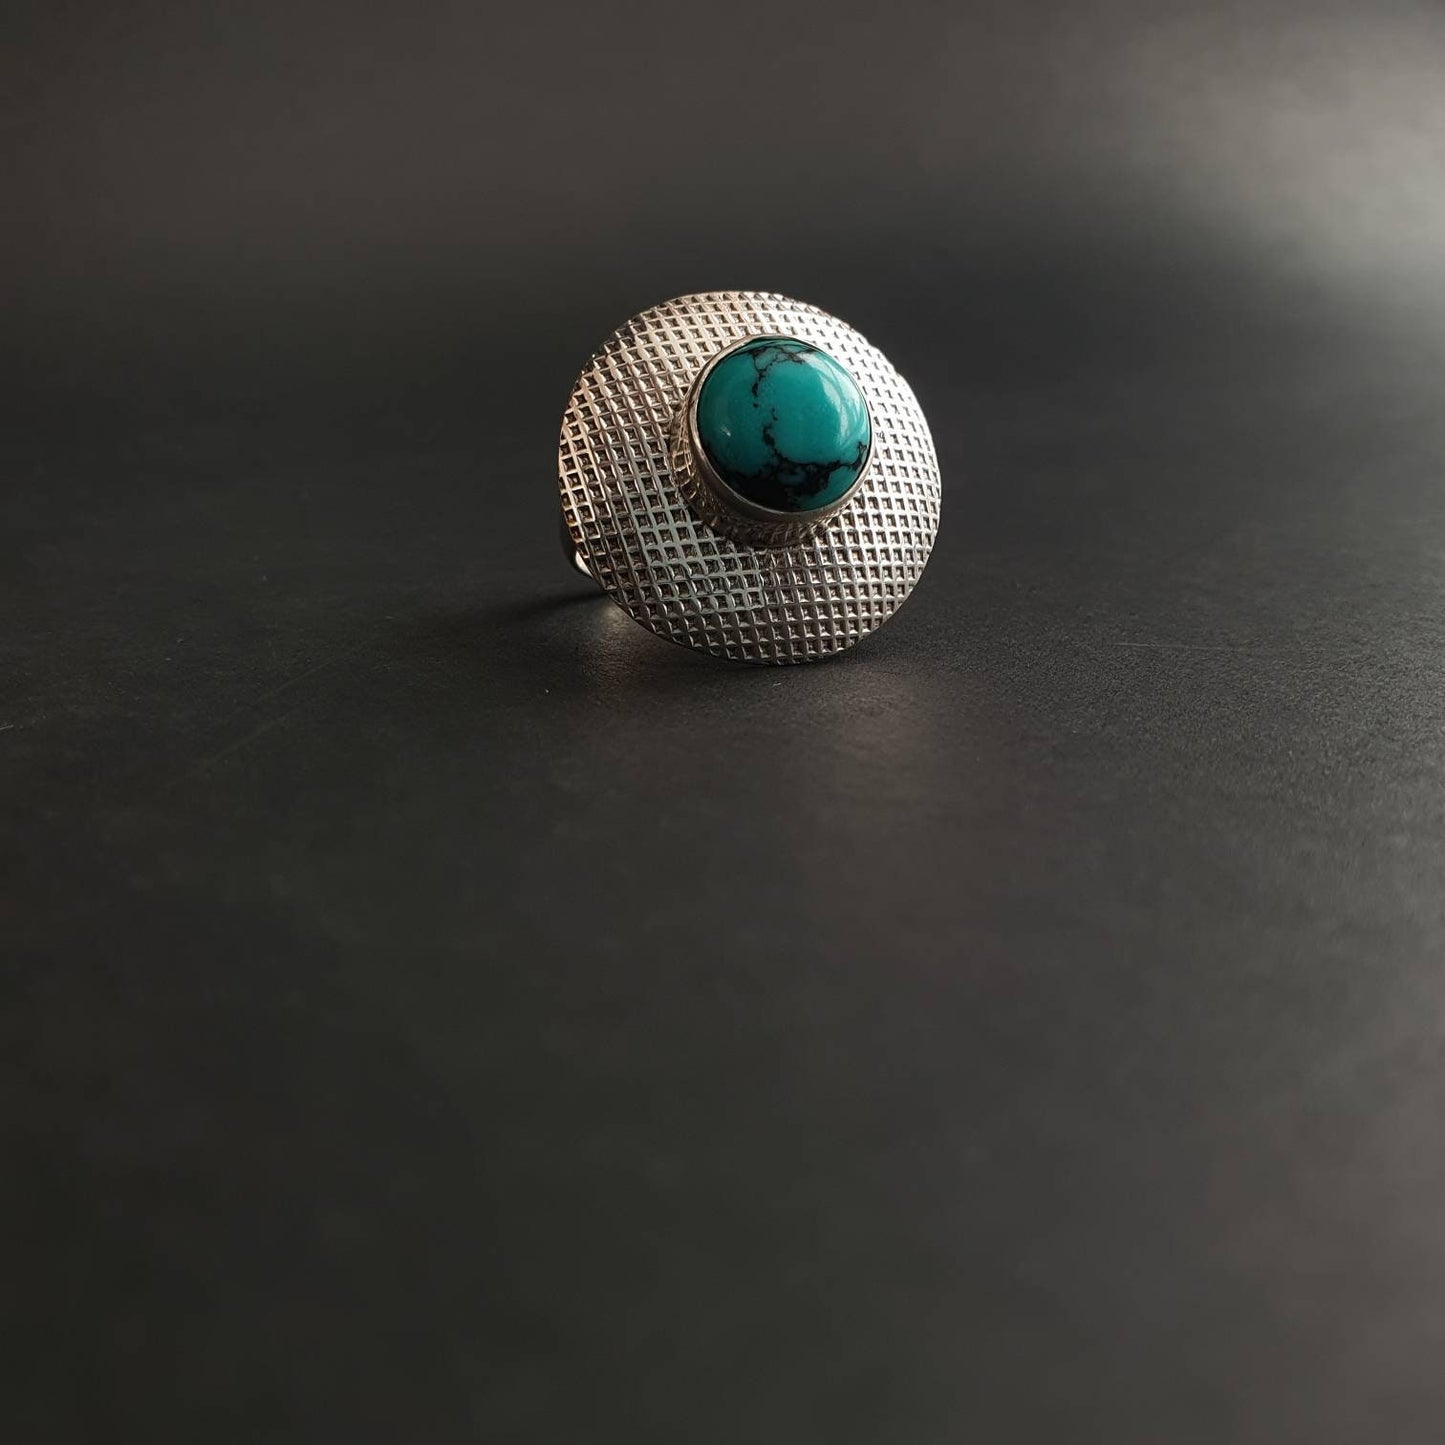 Turquoise Ring Solid 925 Sterling Silver Handmade Women New Jewelry, Unique Statement Gift, Round Shape